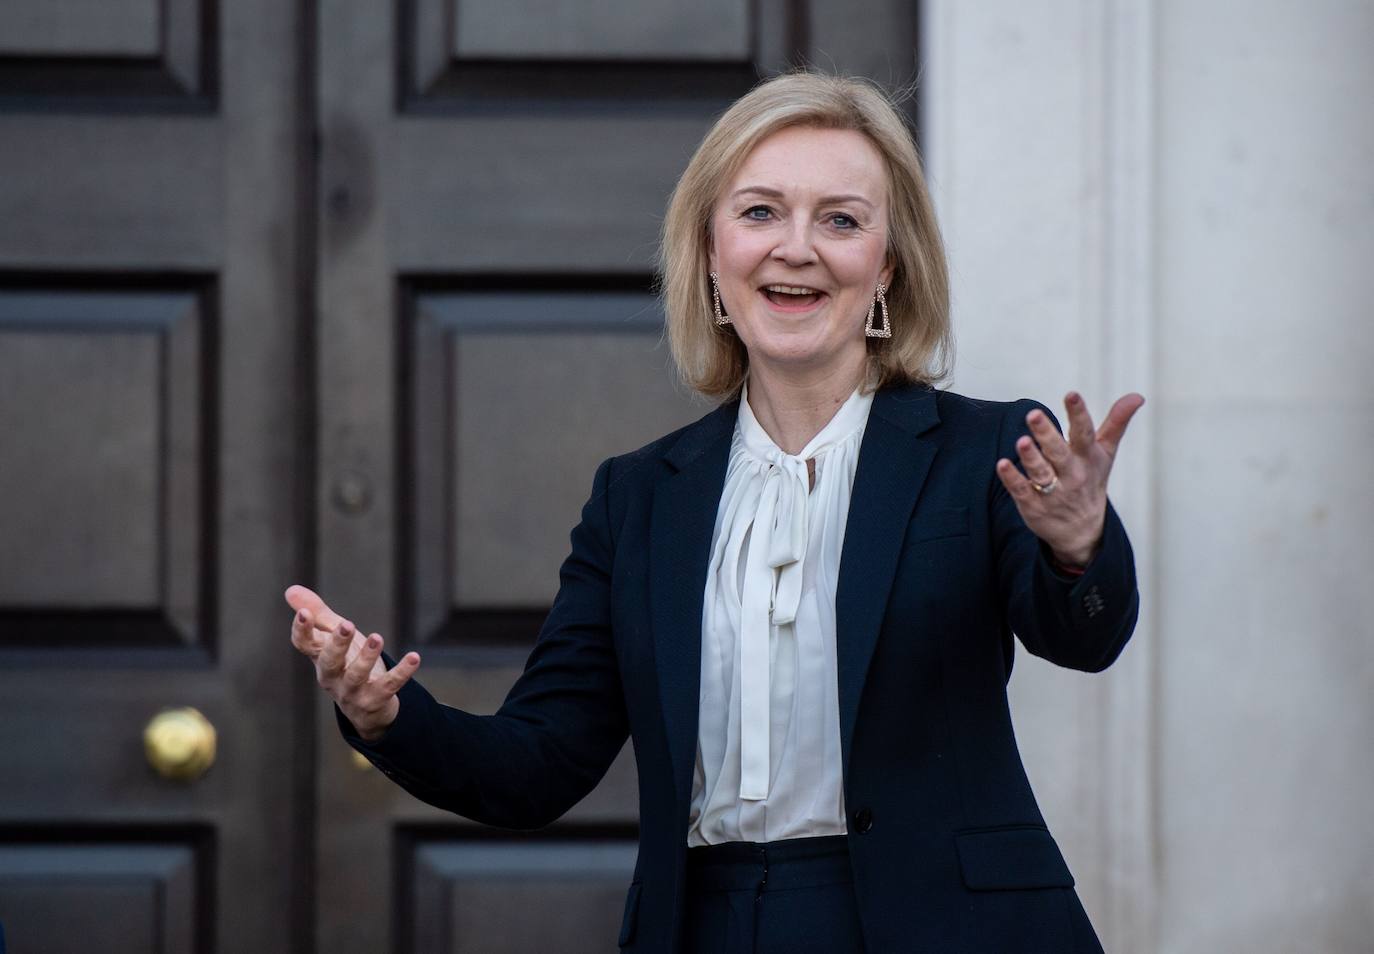 Liz Truss has become the third woman to hold the position of Prime Minister in the United Kingdom